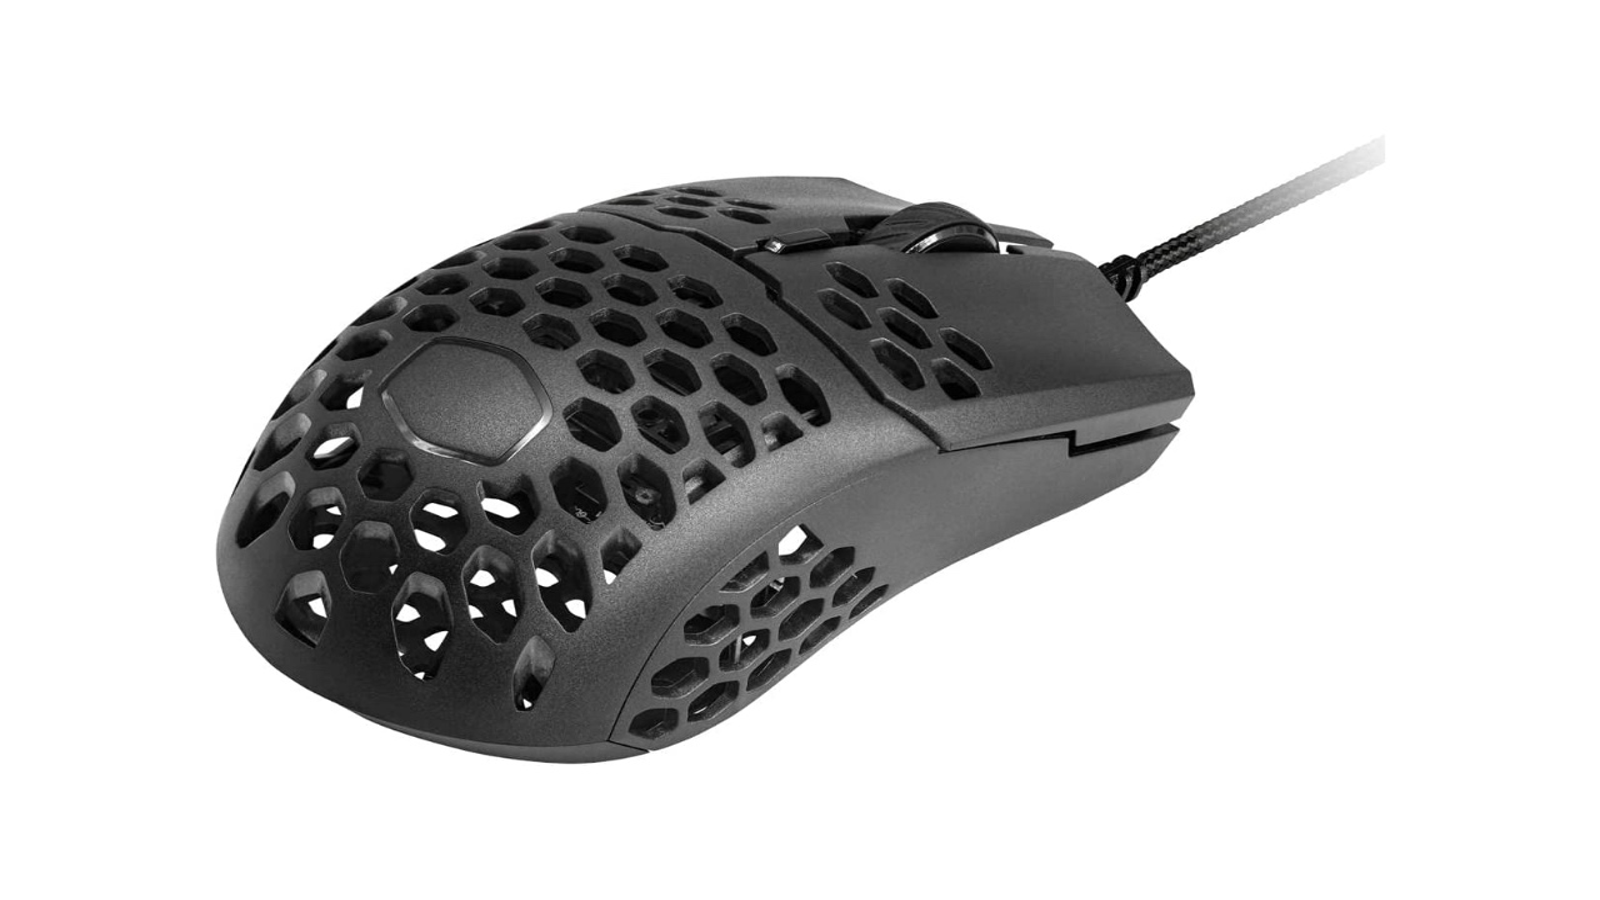 Save over 25 per cent on Cooler Master's ultra light gaming mouse